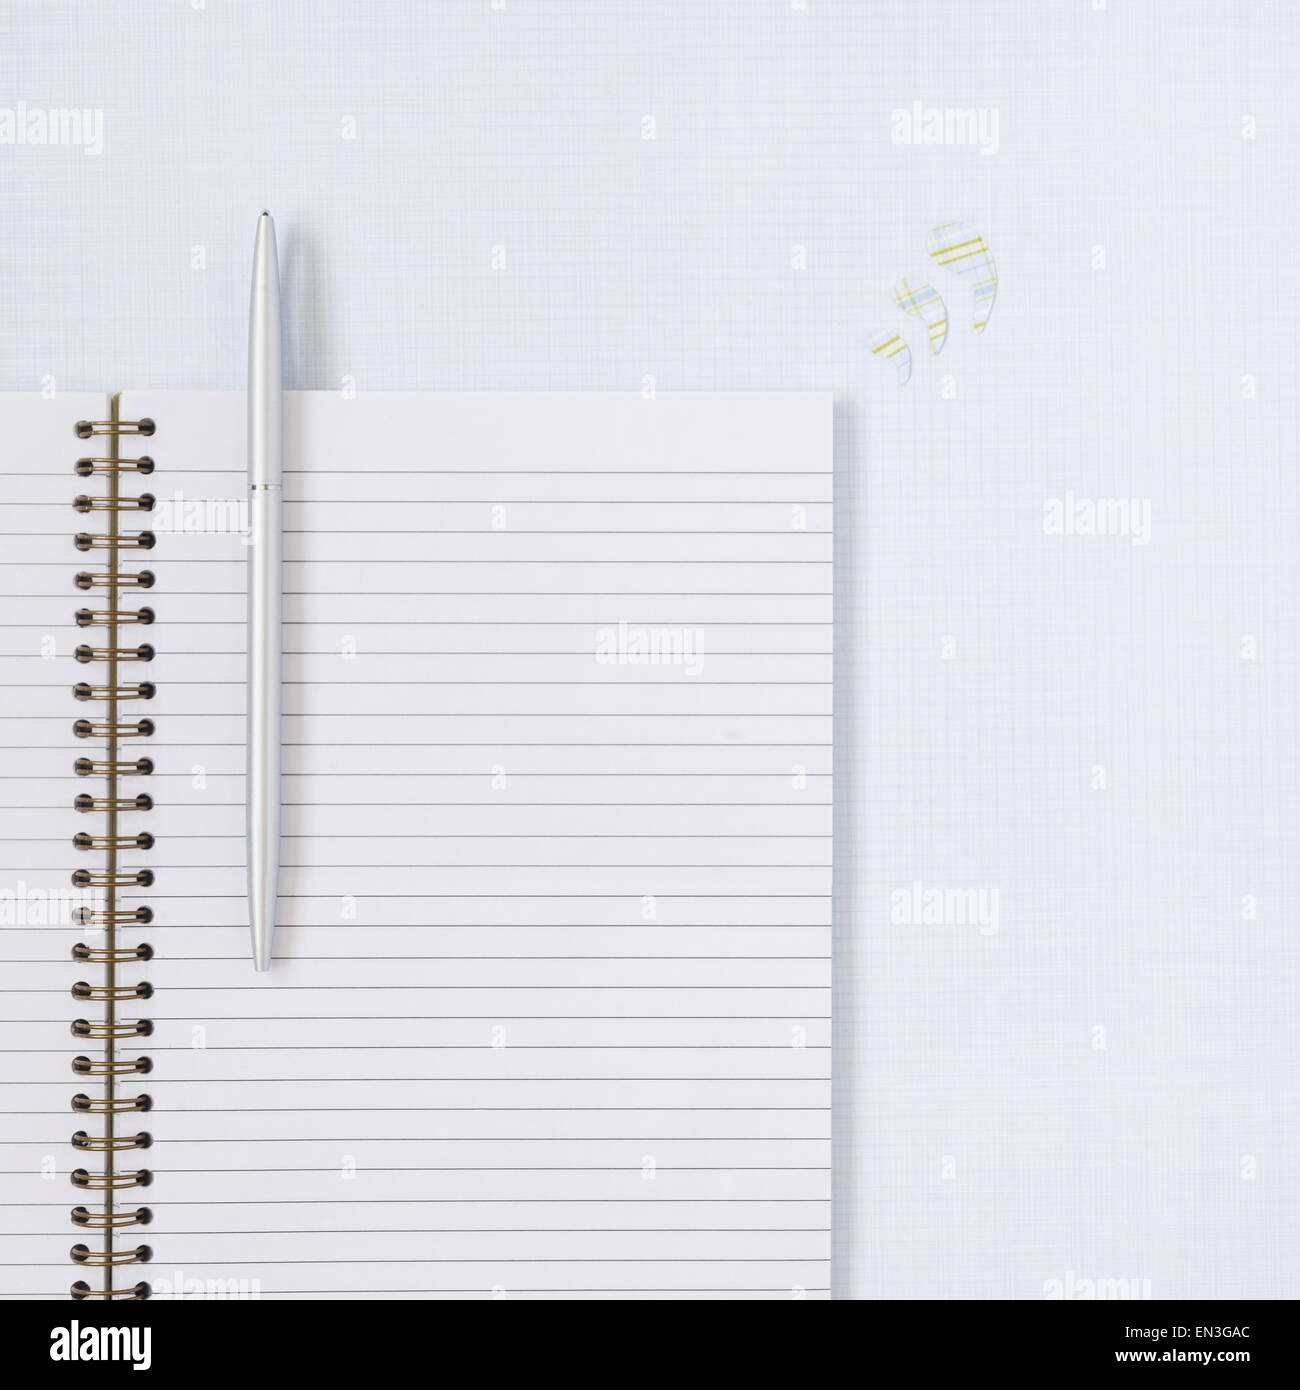 Spiral notebook with pen Stock Photo